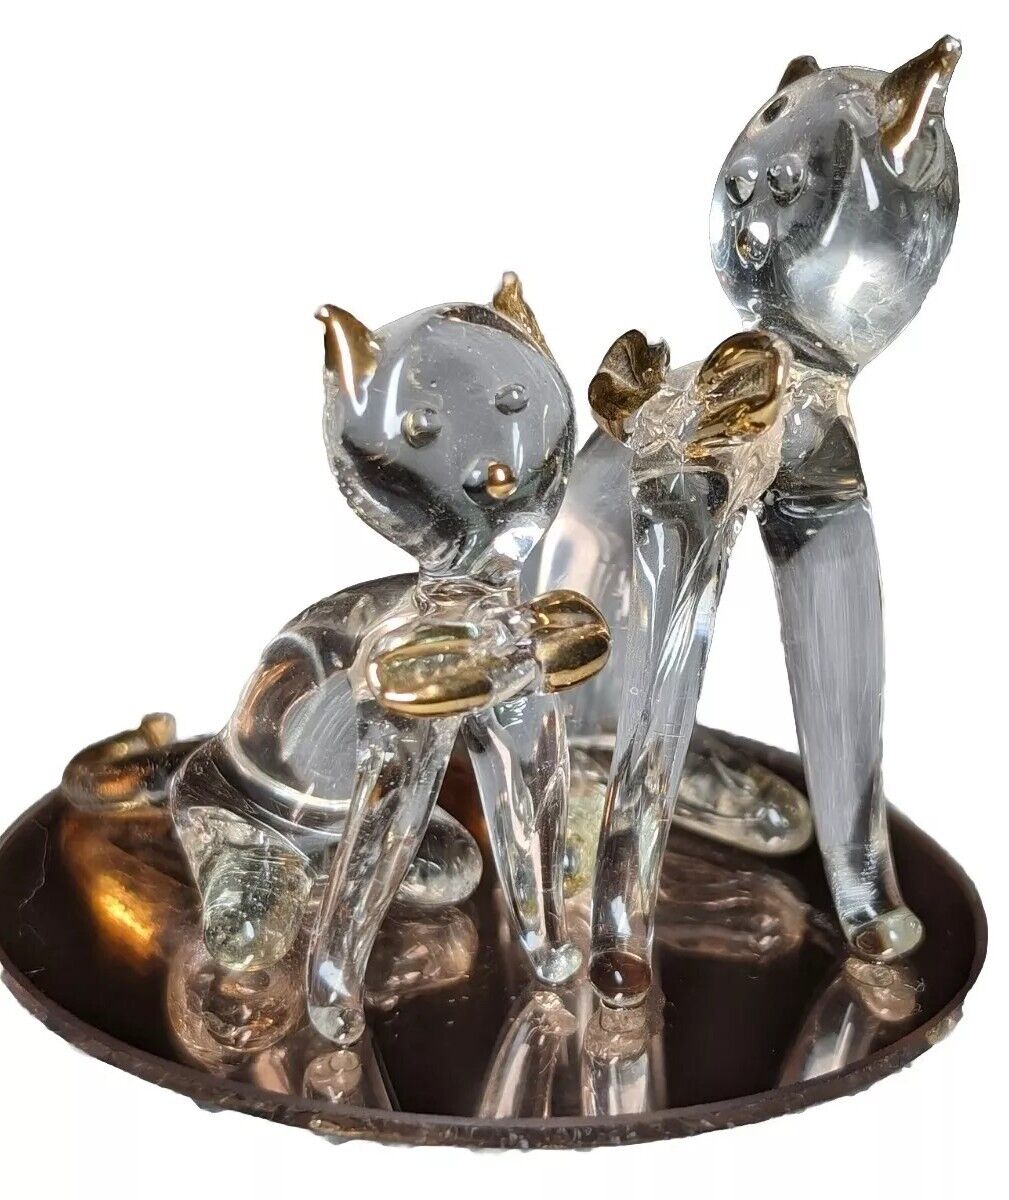 Vintage DURA-BEST Creations Handblown Glass Kitty Cats Gold Accents On Mirror 